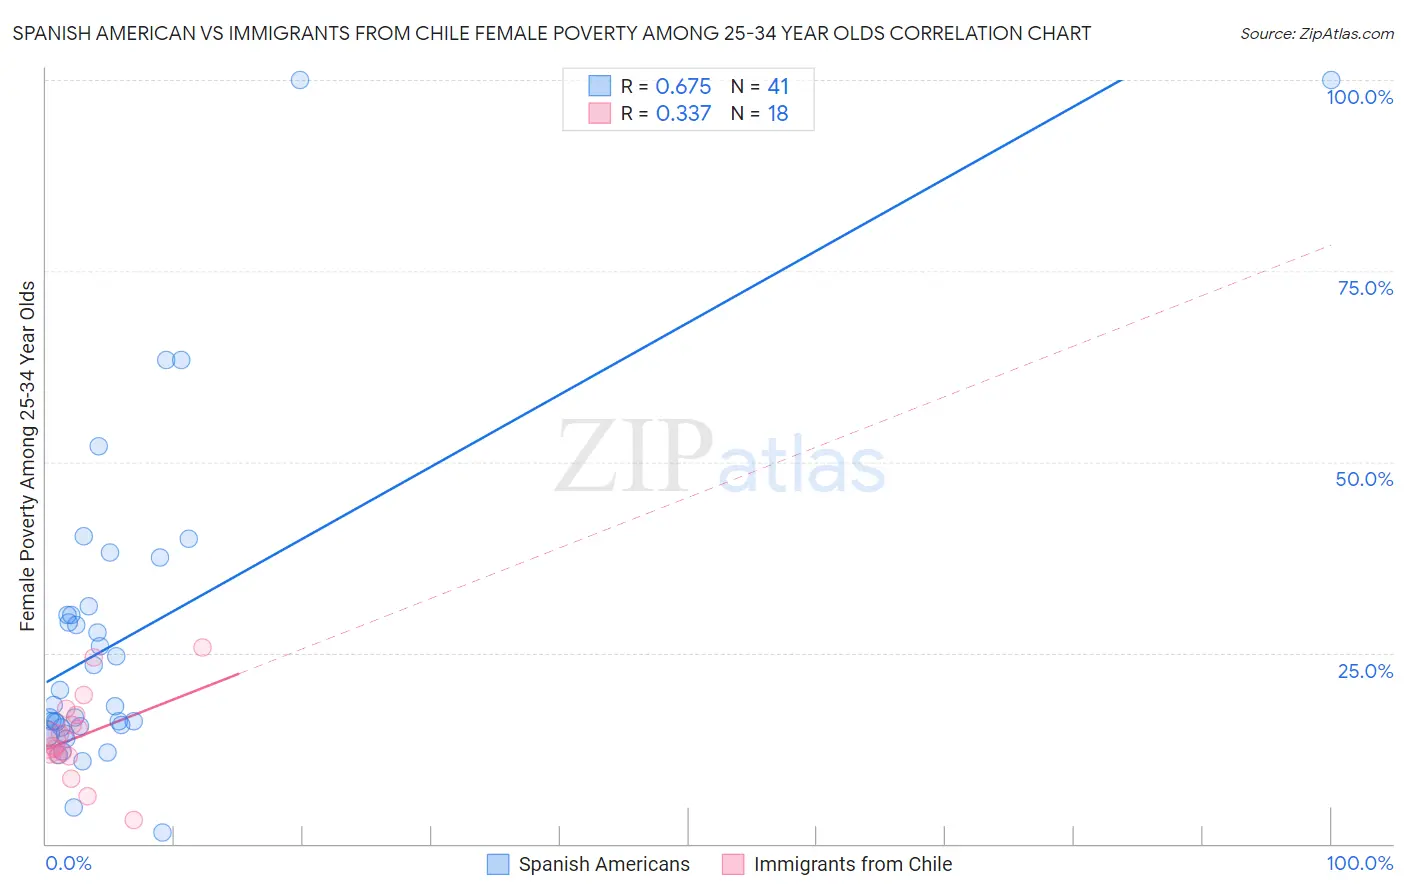 Spanish American vs Immigrants from Chile Female Poverty Among 25-34 Year Olds